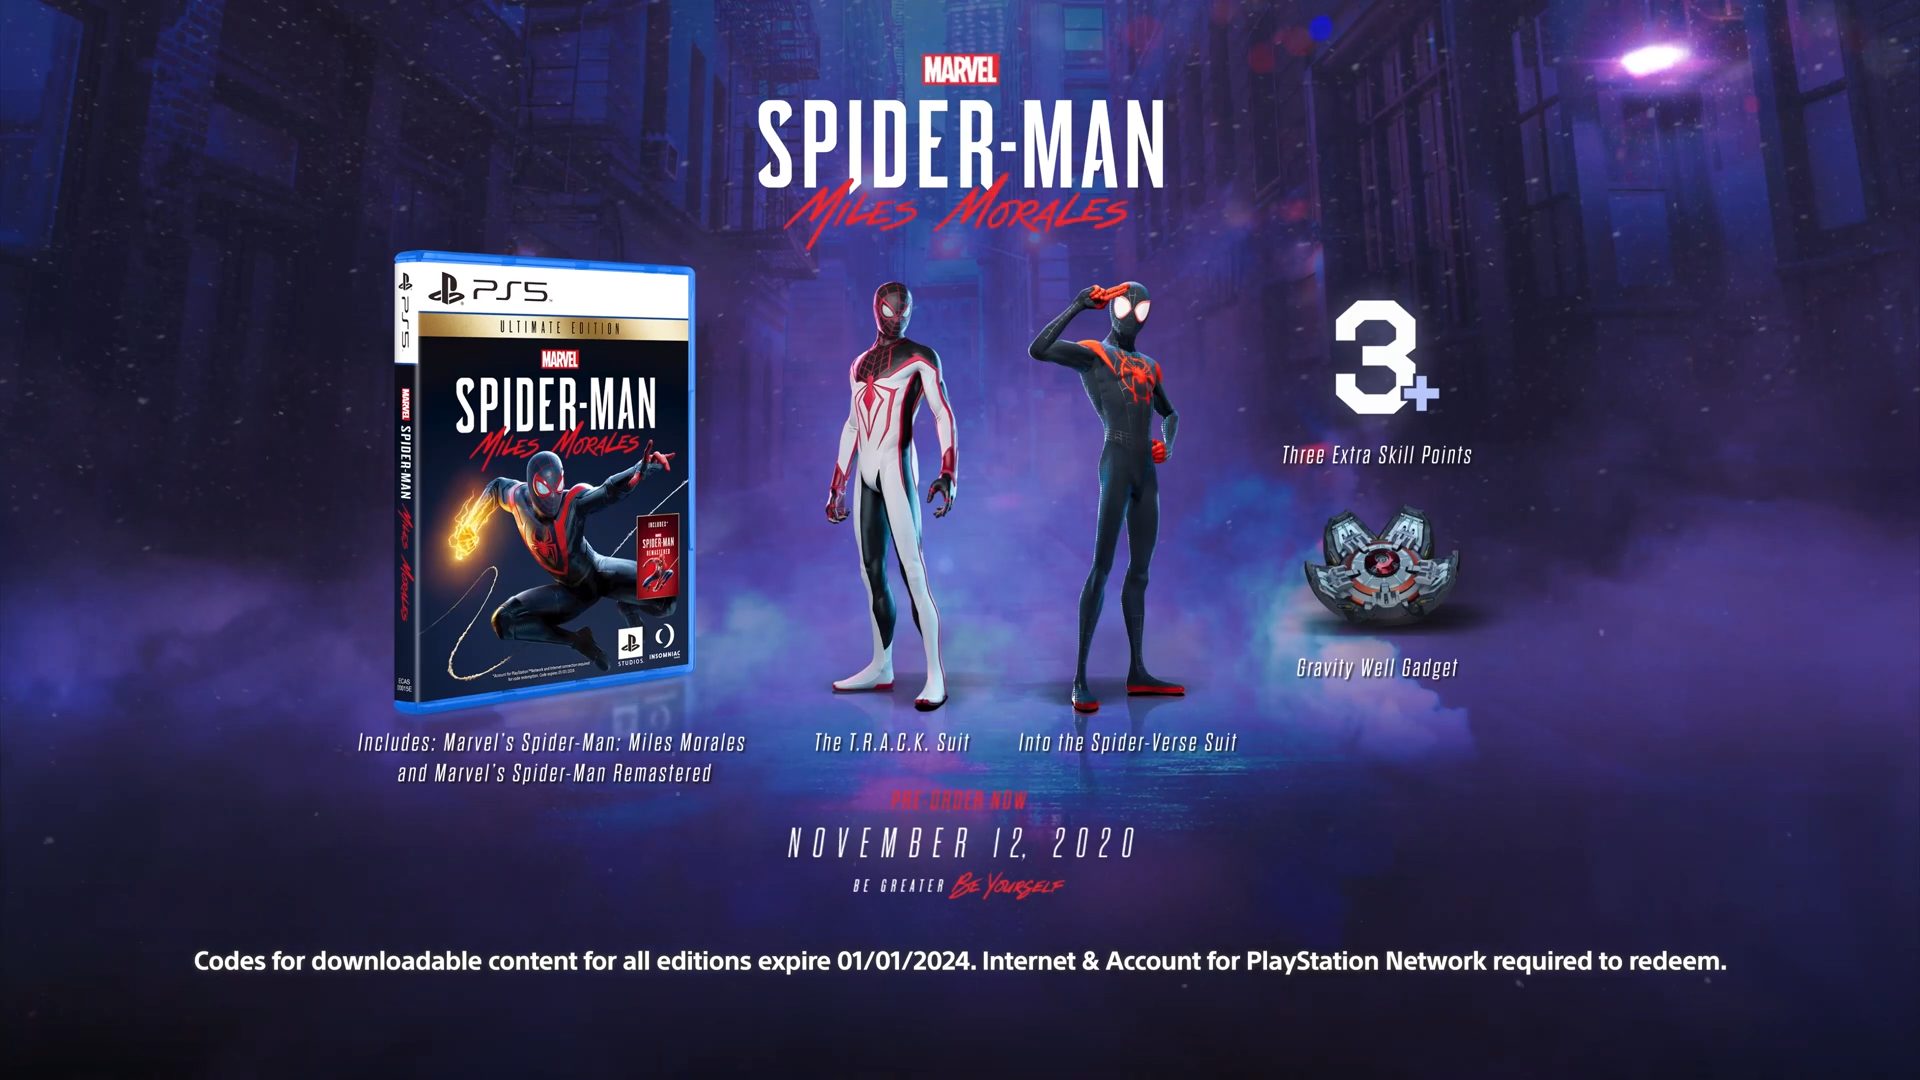 Spider-Man: Miles Morales Launch Edition - PlayStation 5 